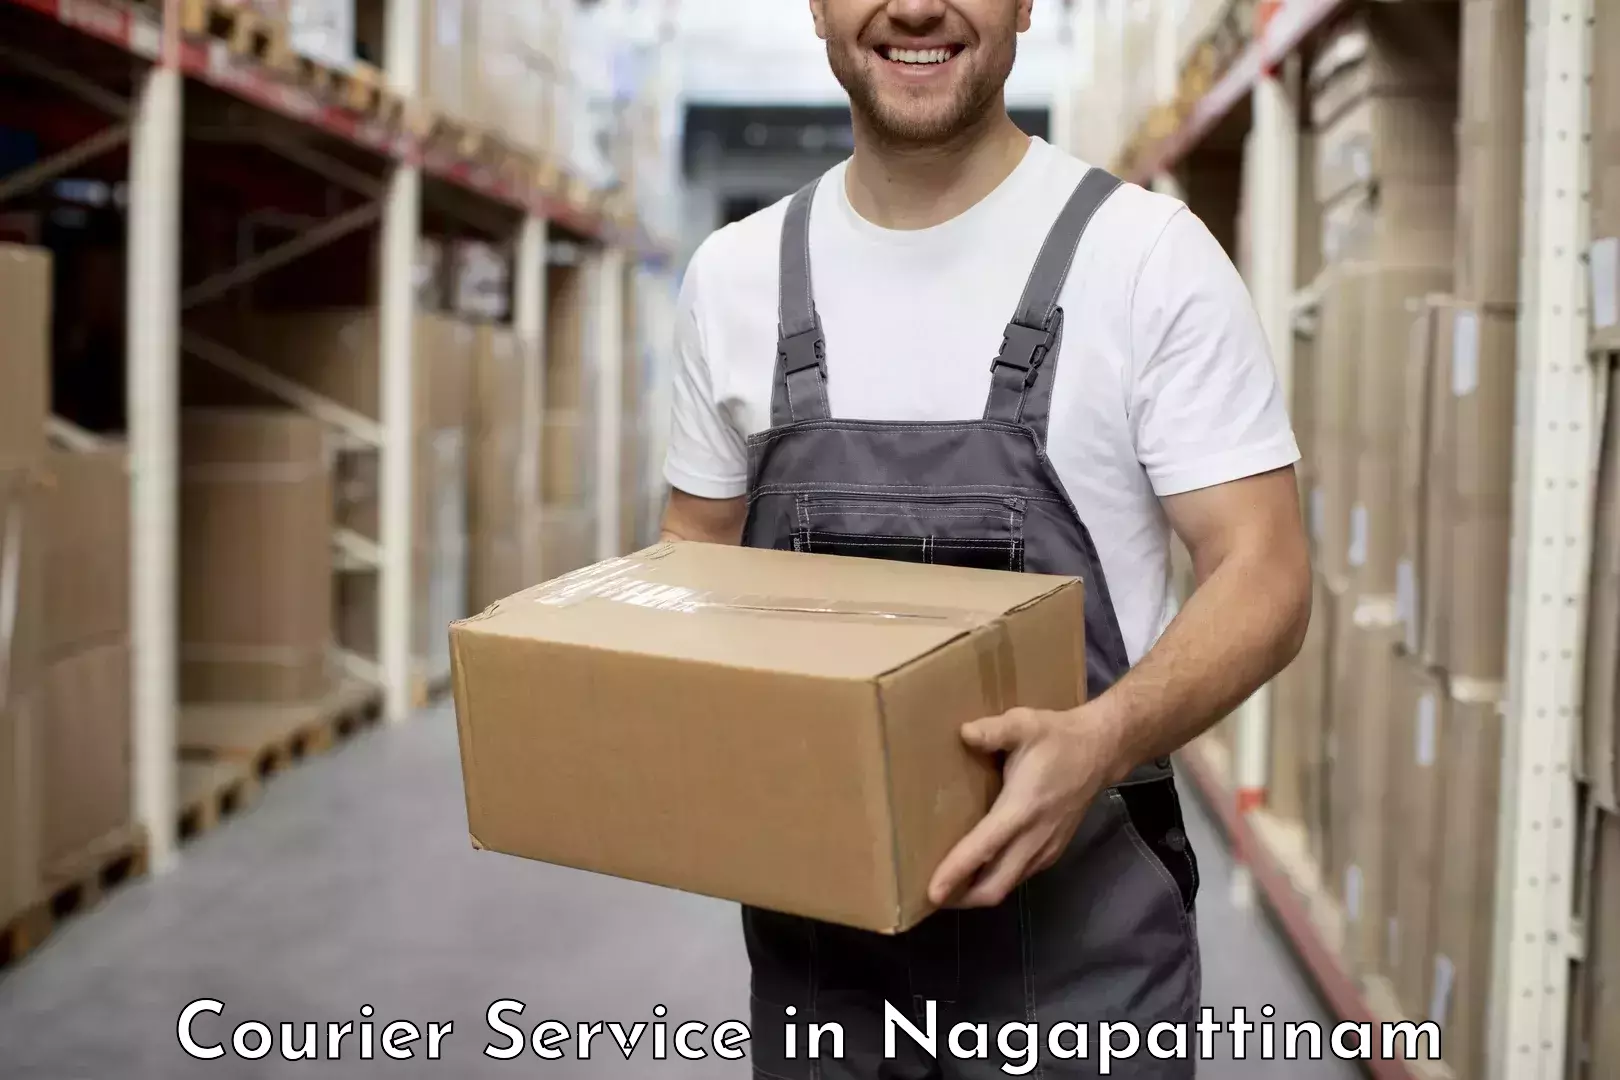 Business shipping needs in Nagapattinam